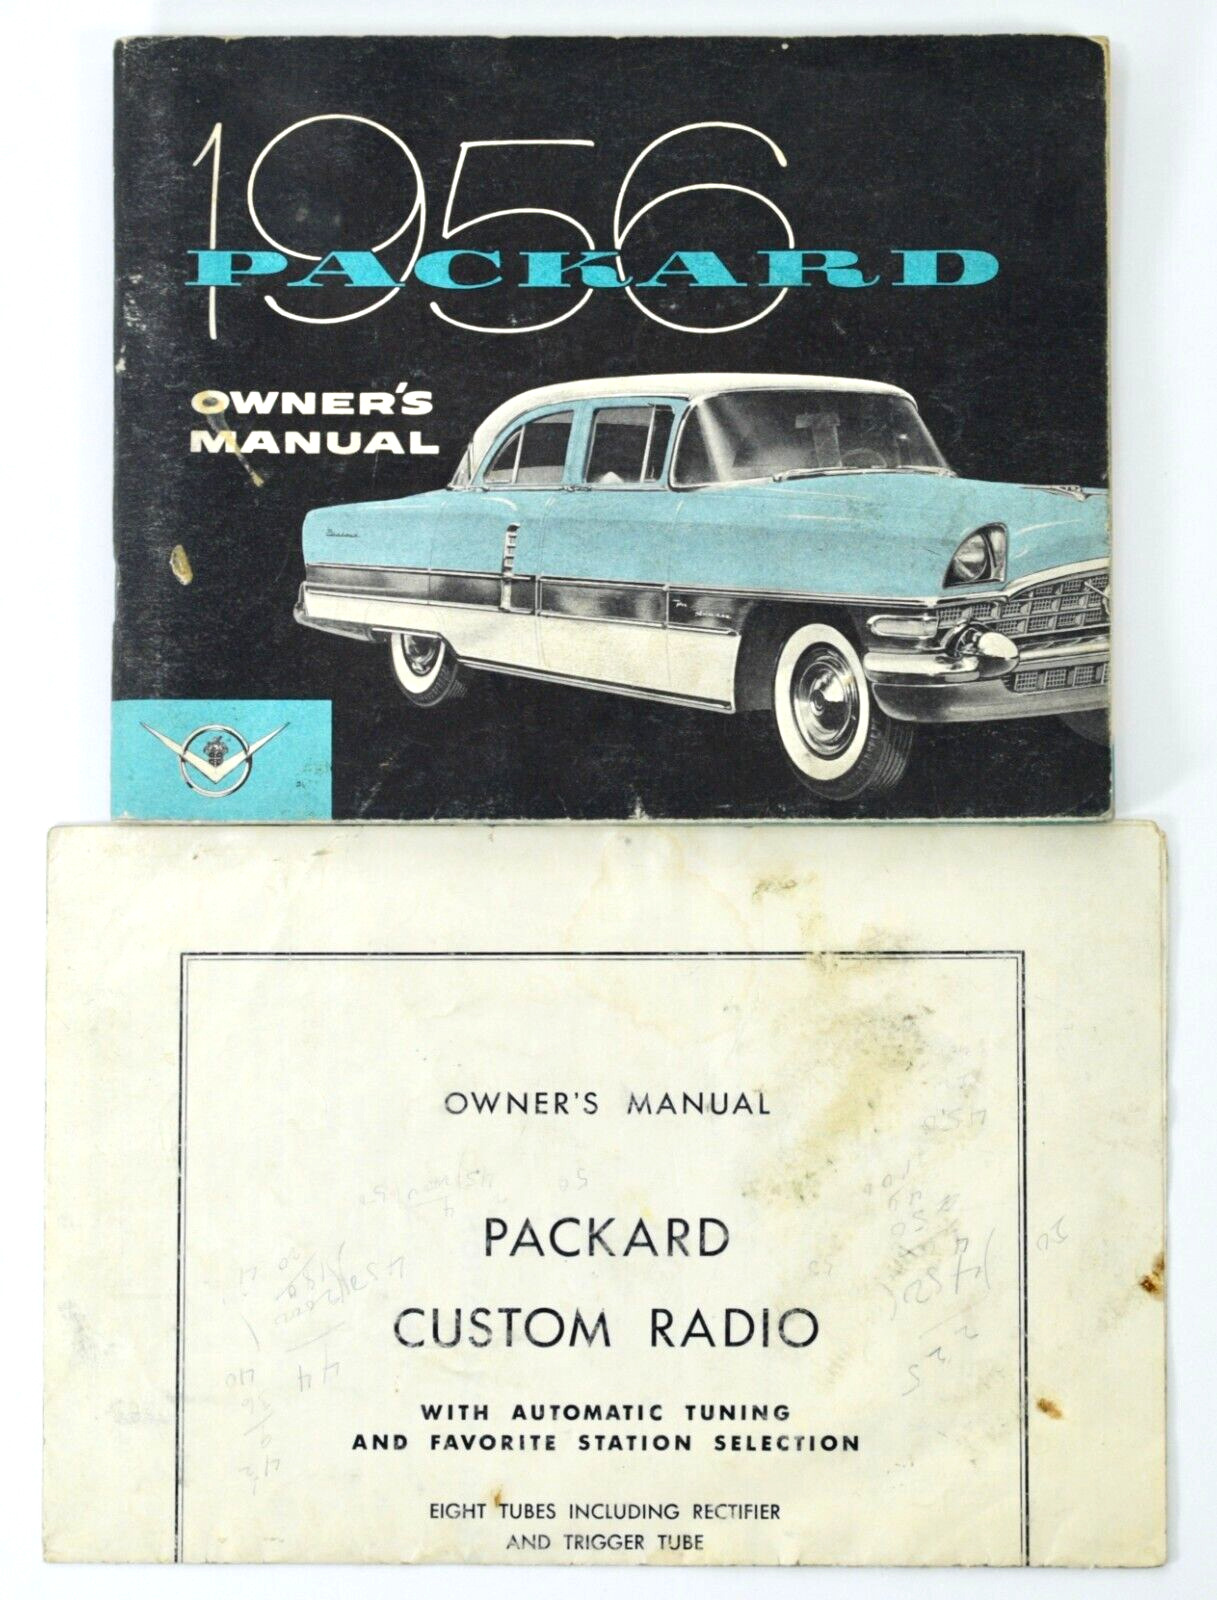 1956 PACKARD Owner\'s Manual Studabaker-Packard Corp with Custom Radio Manual